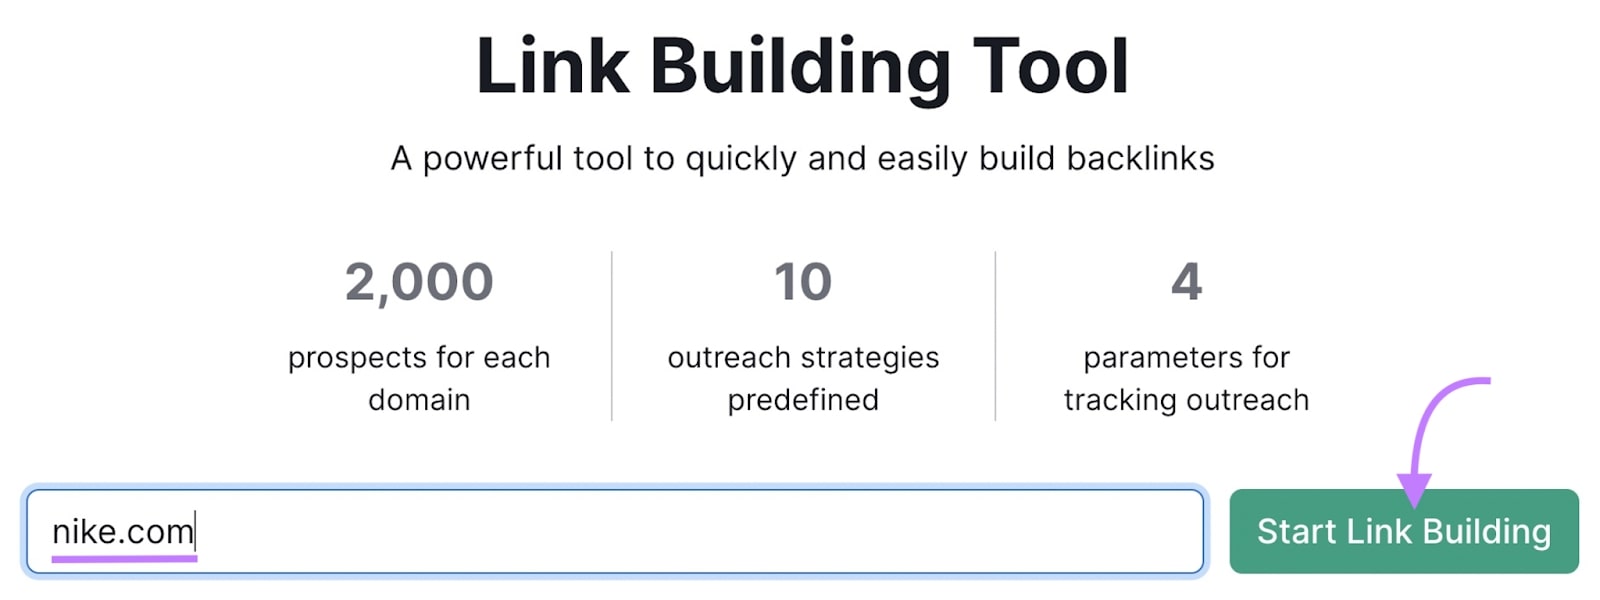 "nike.com" entered into the Link Building Tool search bar